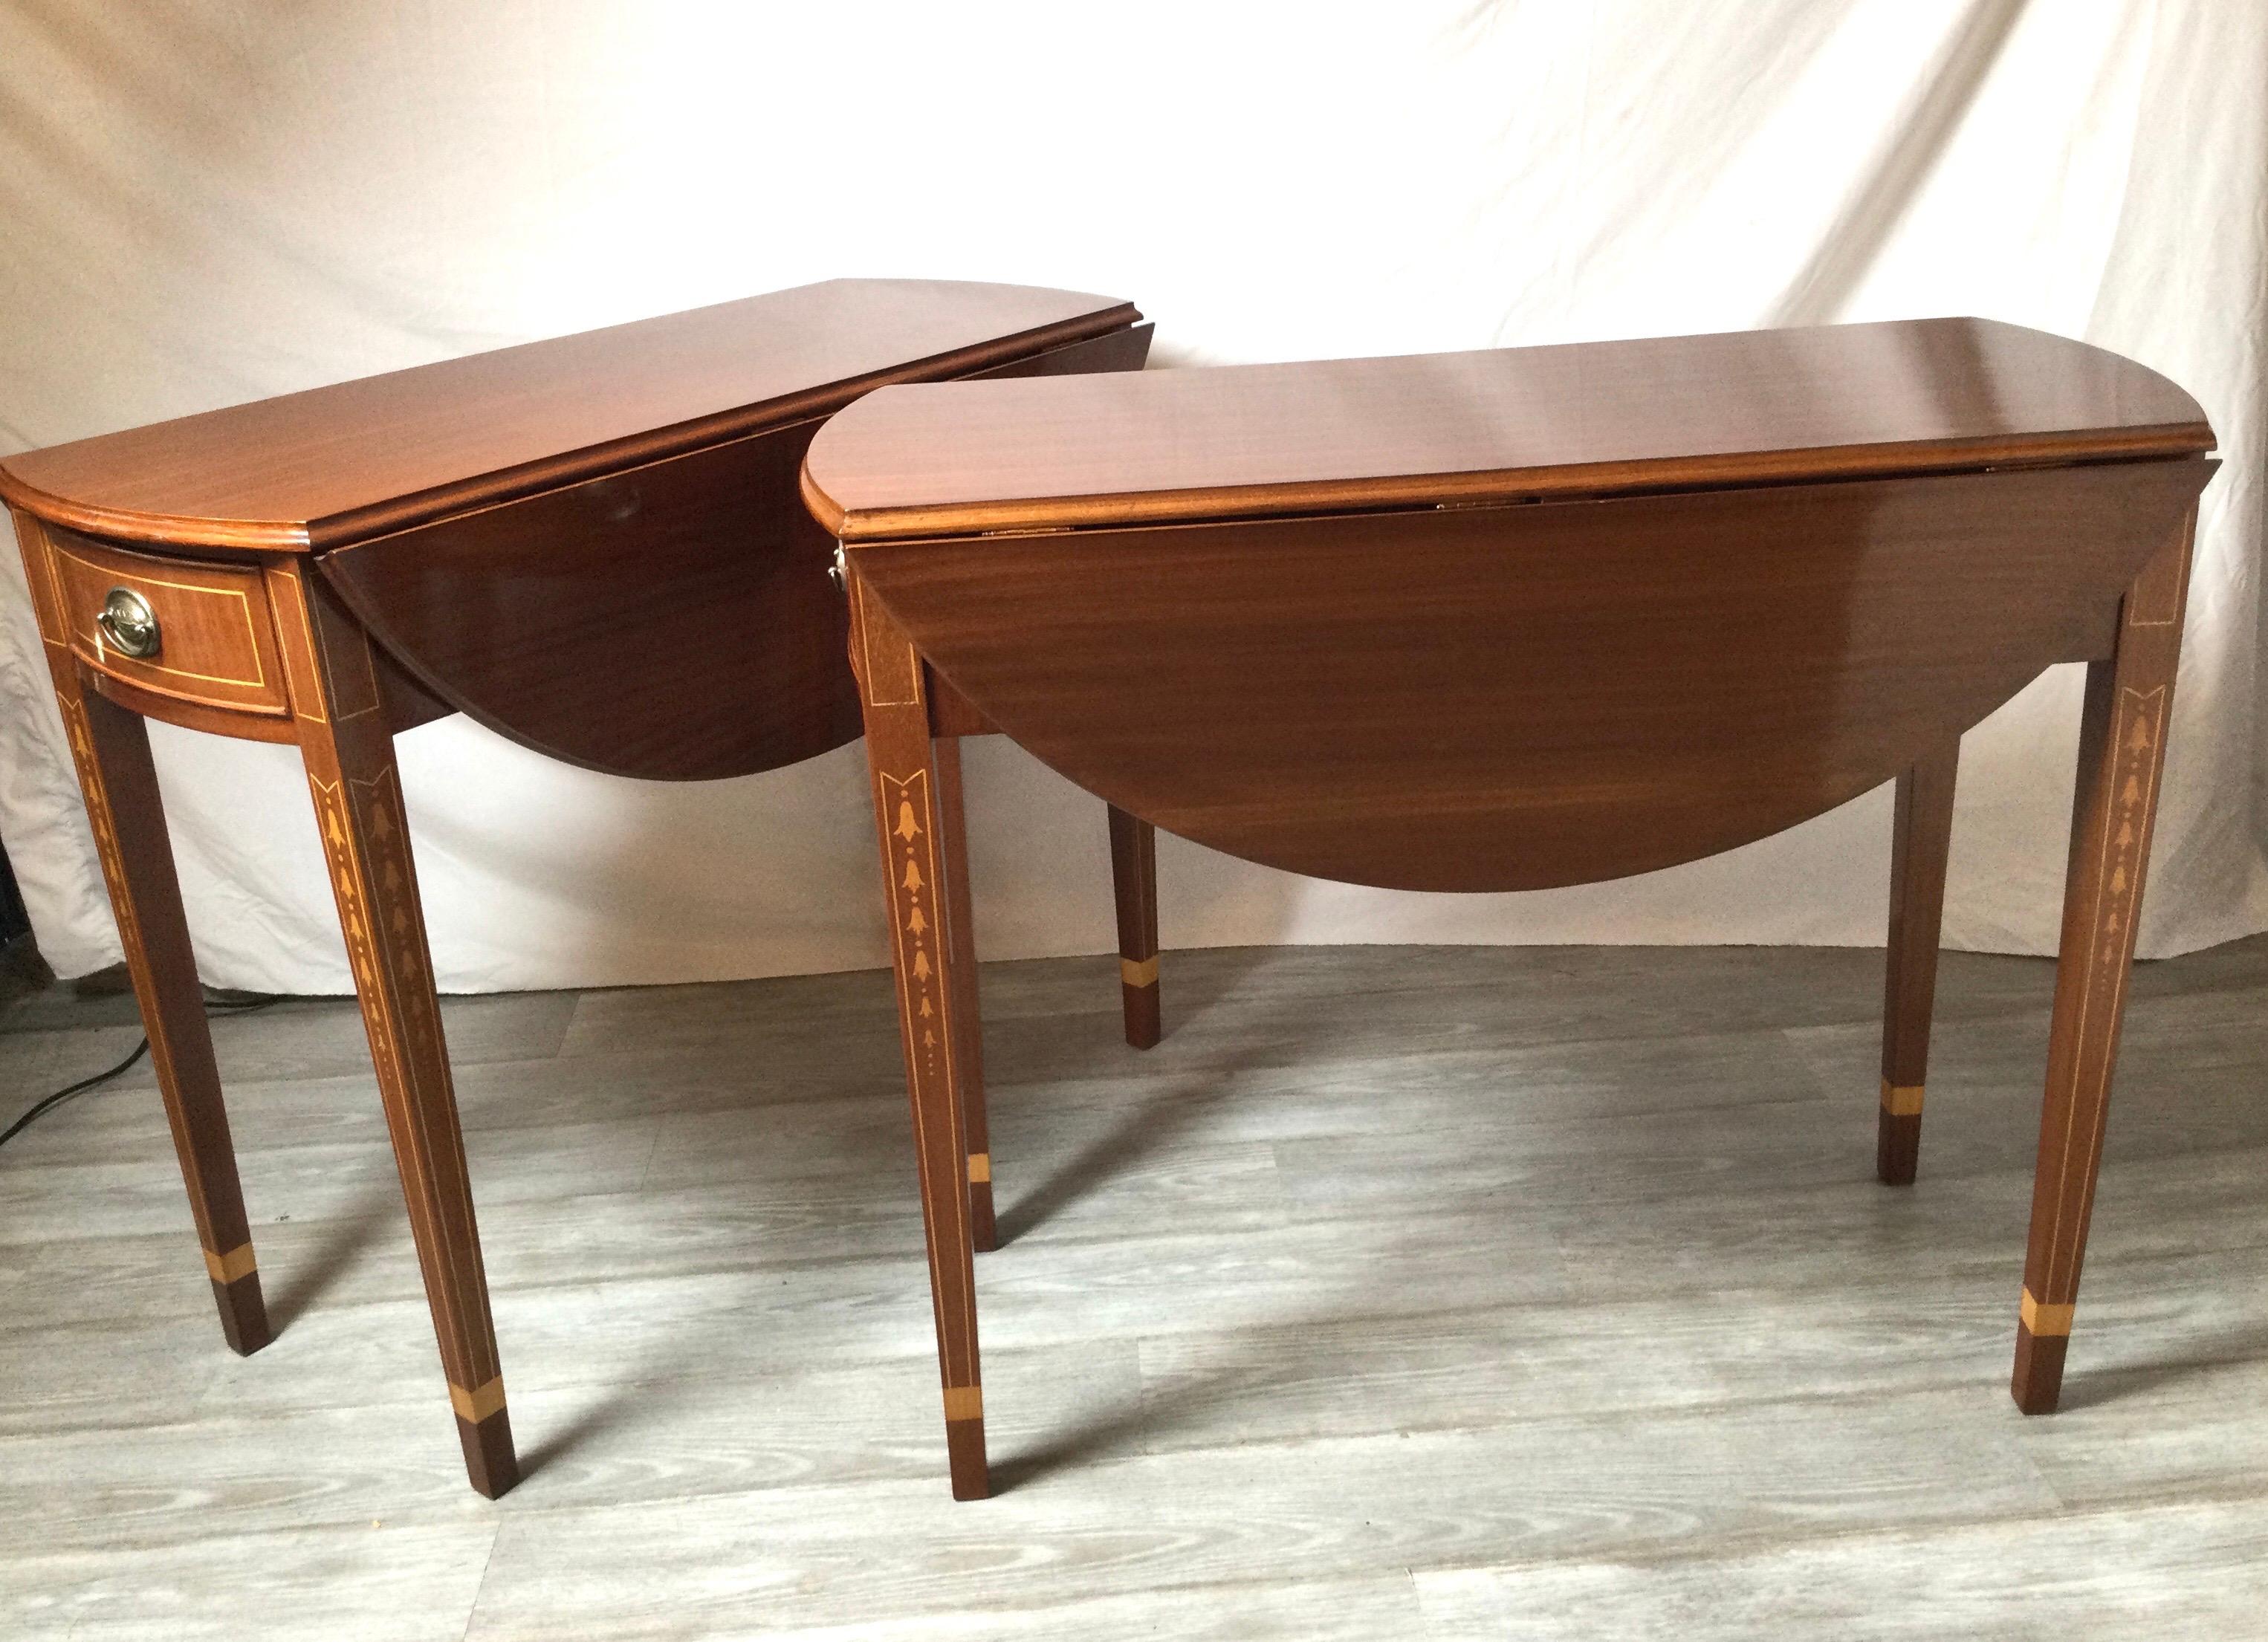 A pair of large scale mahogany Pembroke tables with satinwood inlay of bell flowers with pencil inlay. 33 inches tall, 39.5 inches deep and 18 inches wide, 42 inches wide with leaves up.